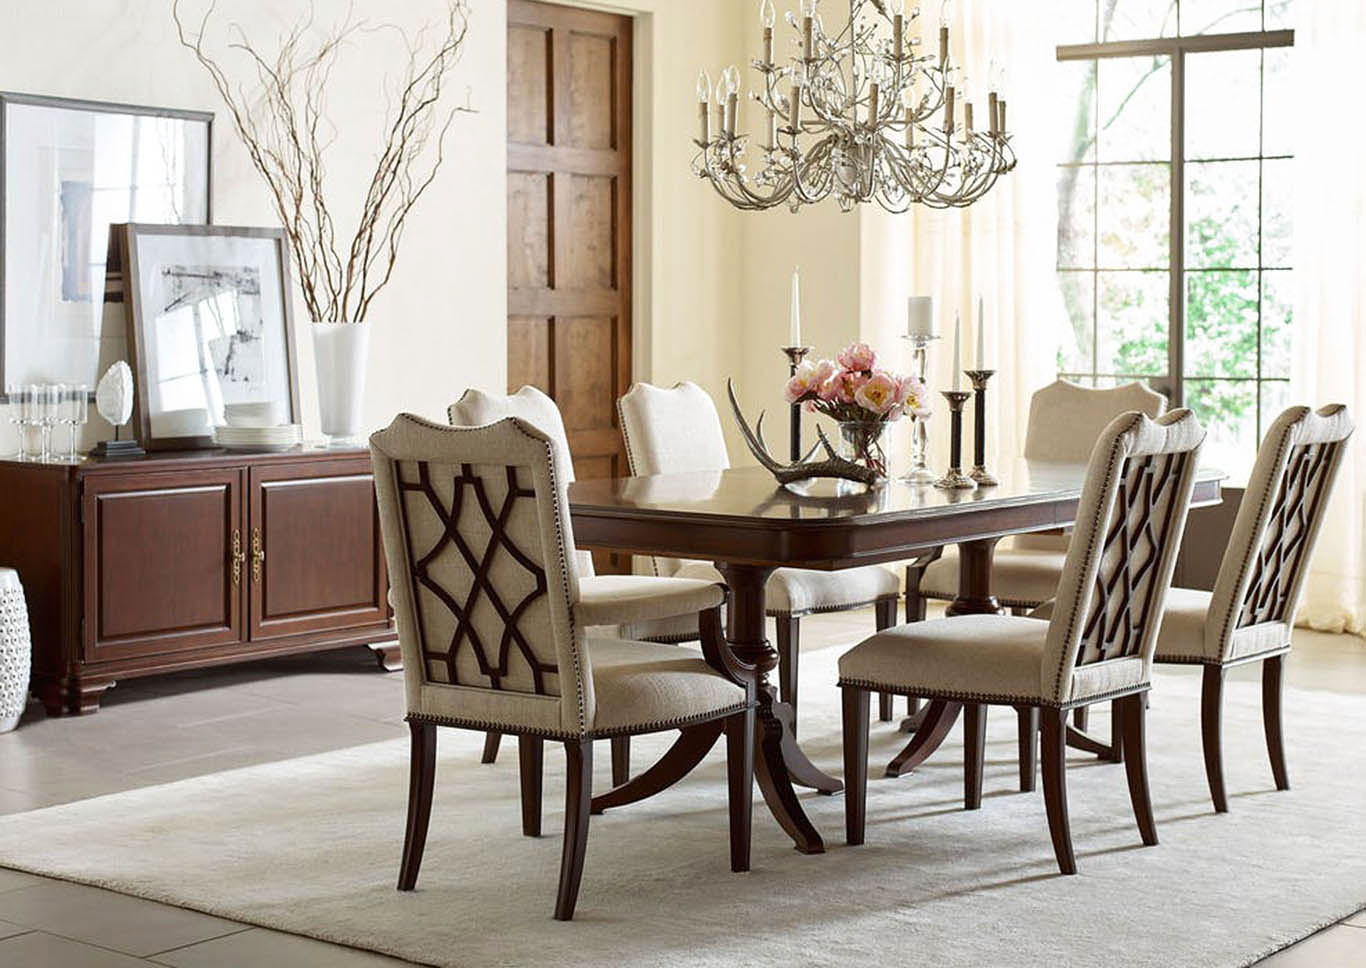 Hadleigh Classic Cherry Dining Set w/4 Upholstered Side Chairs & 2 Upholstered Arm Chairs,Kincaid